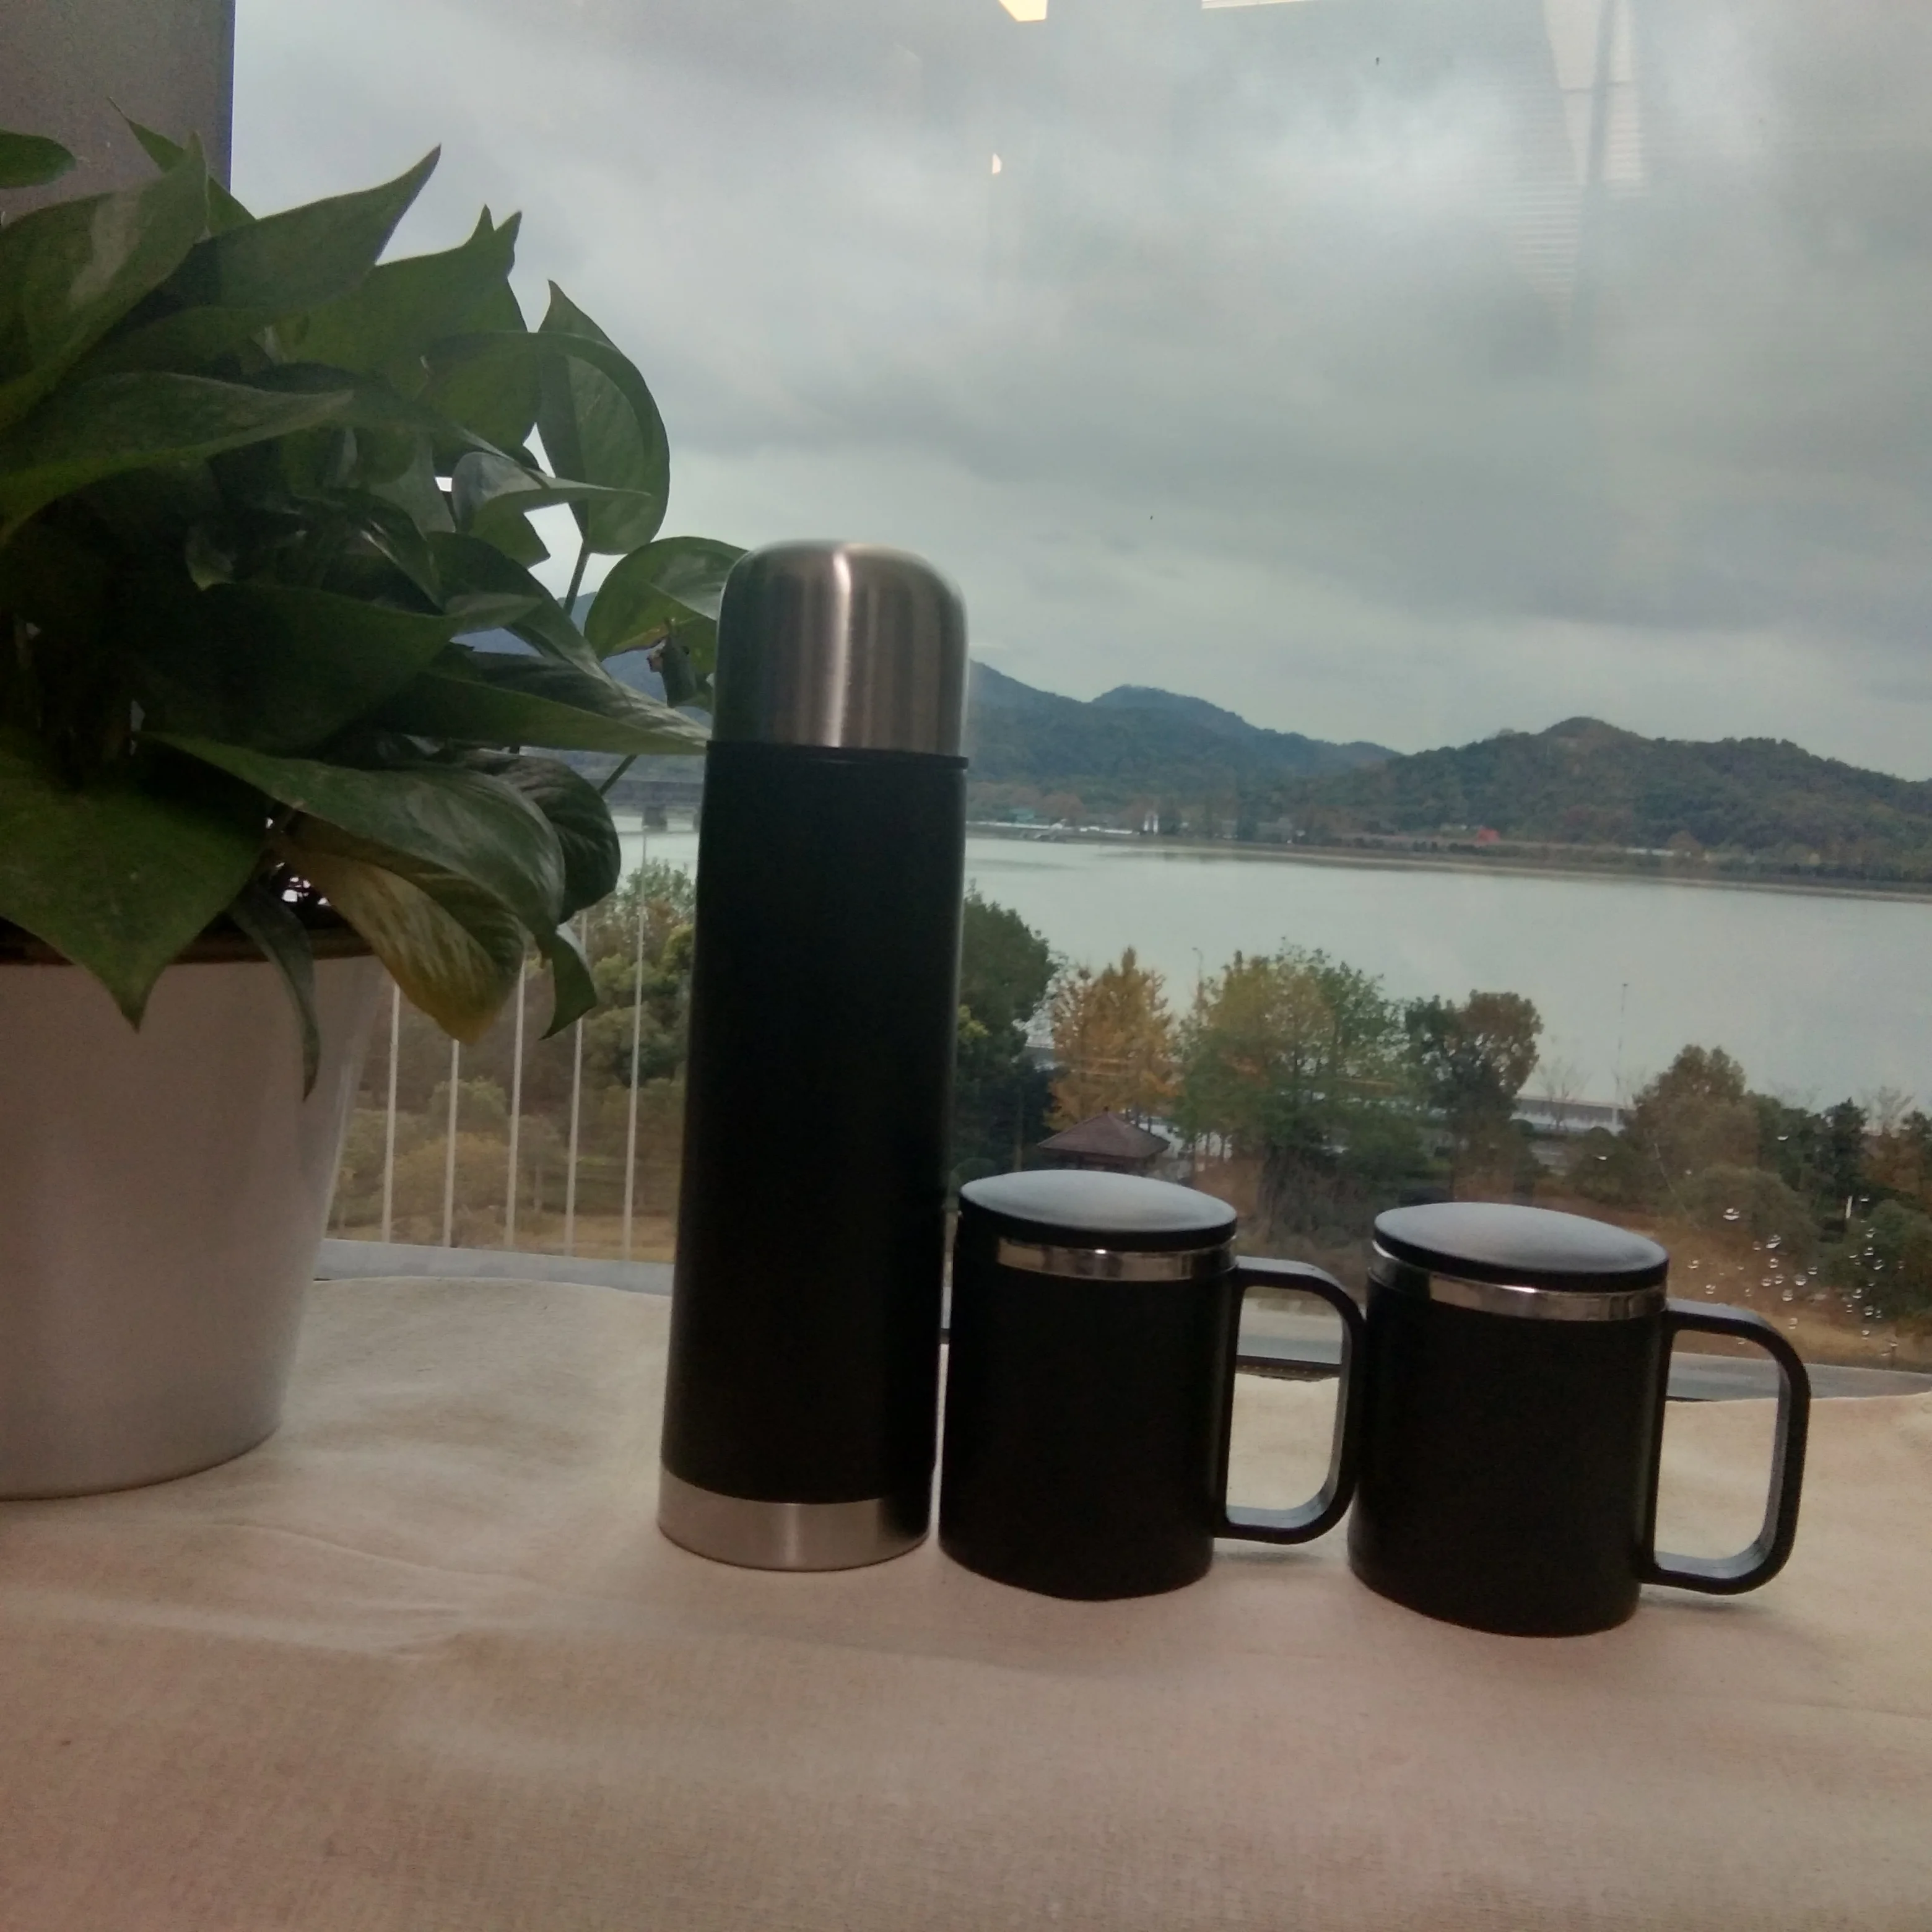 Vacuum Flask Thermos Cup Corporate Gift Set – VIGOR MARKET